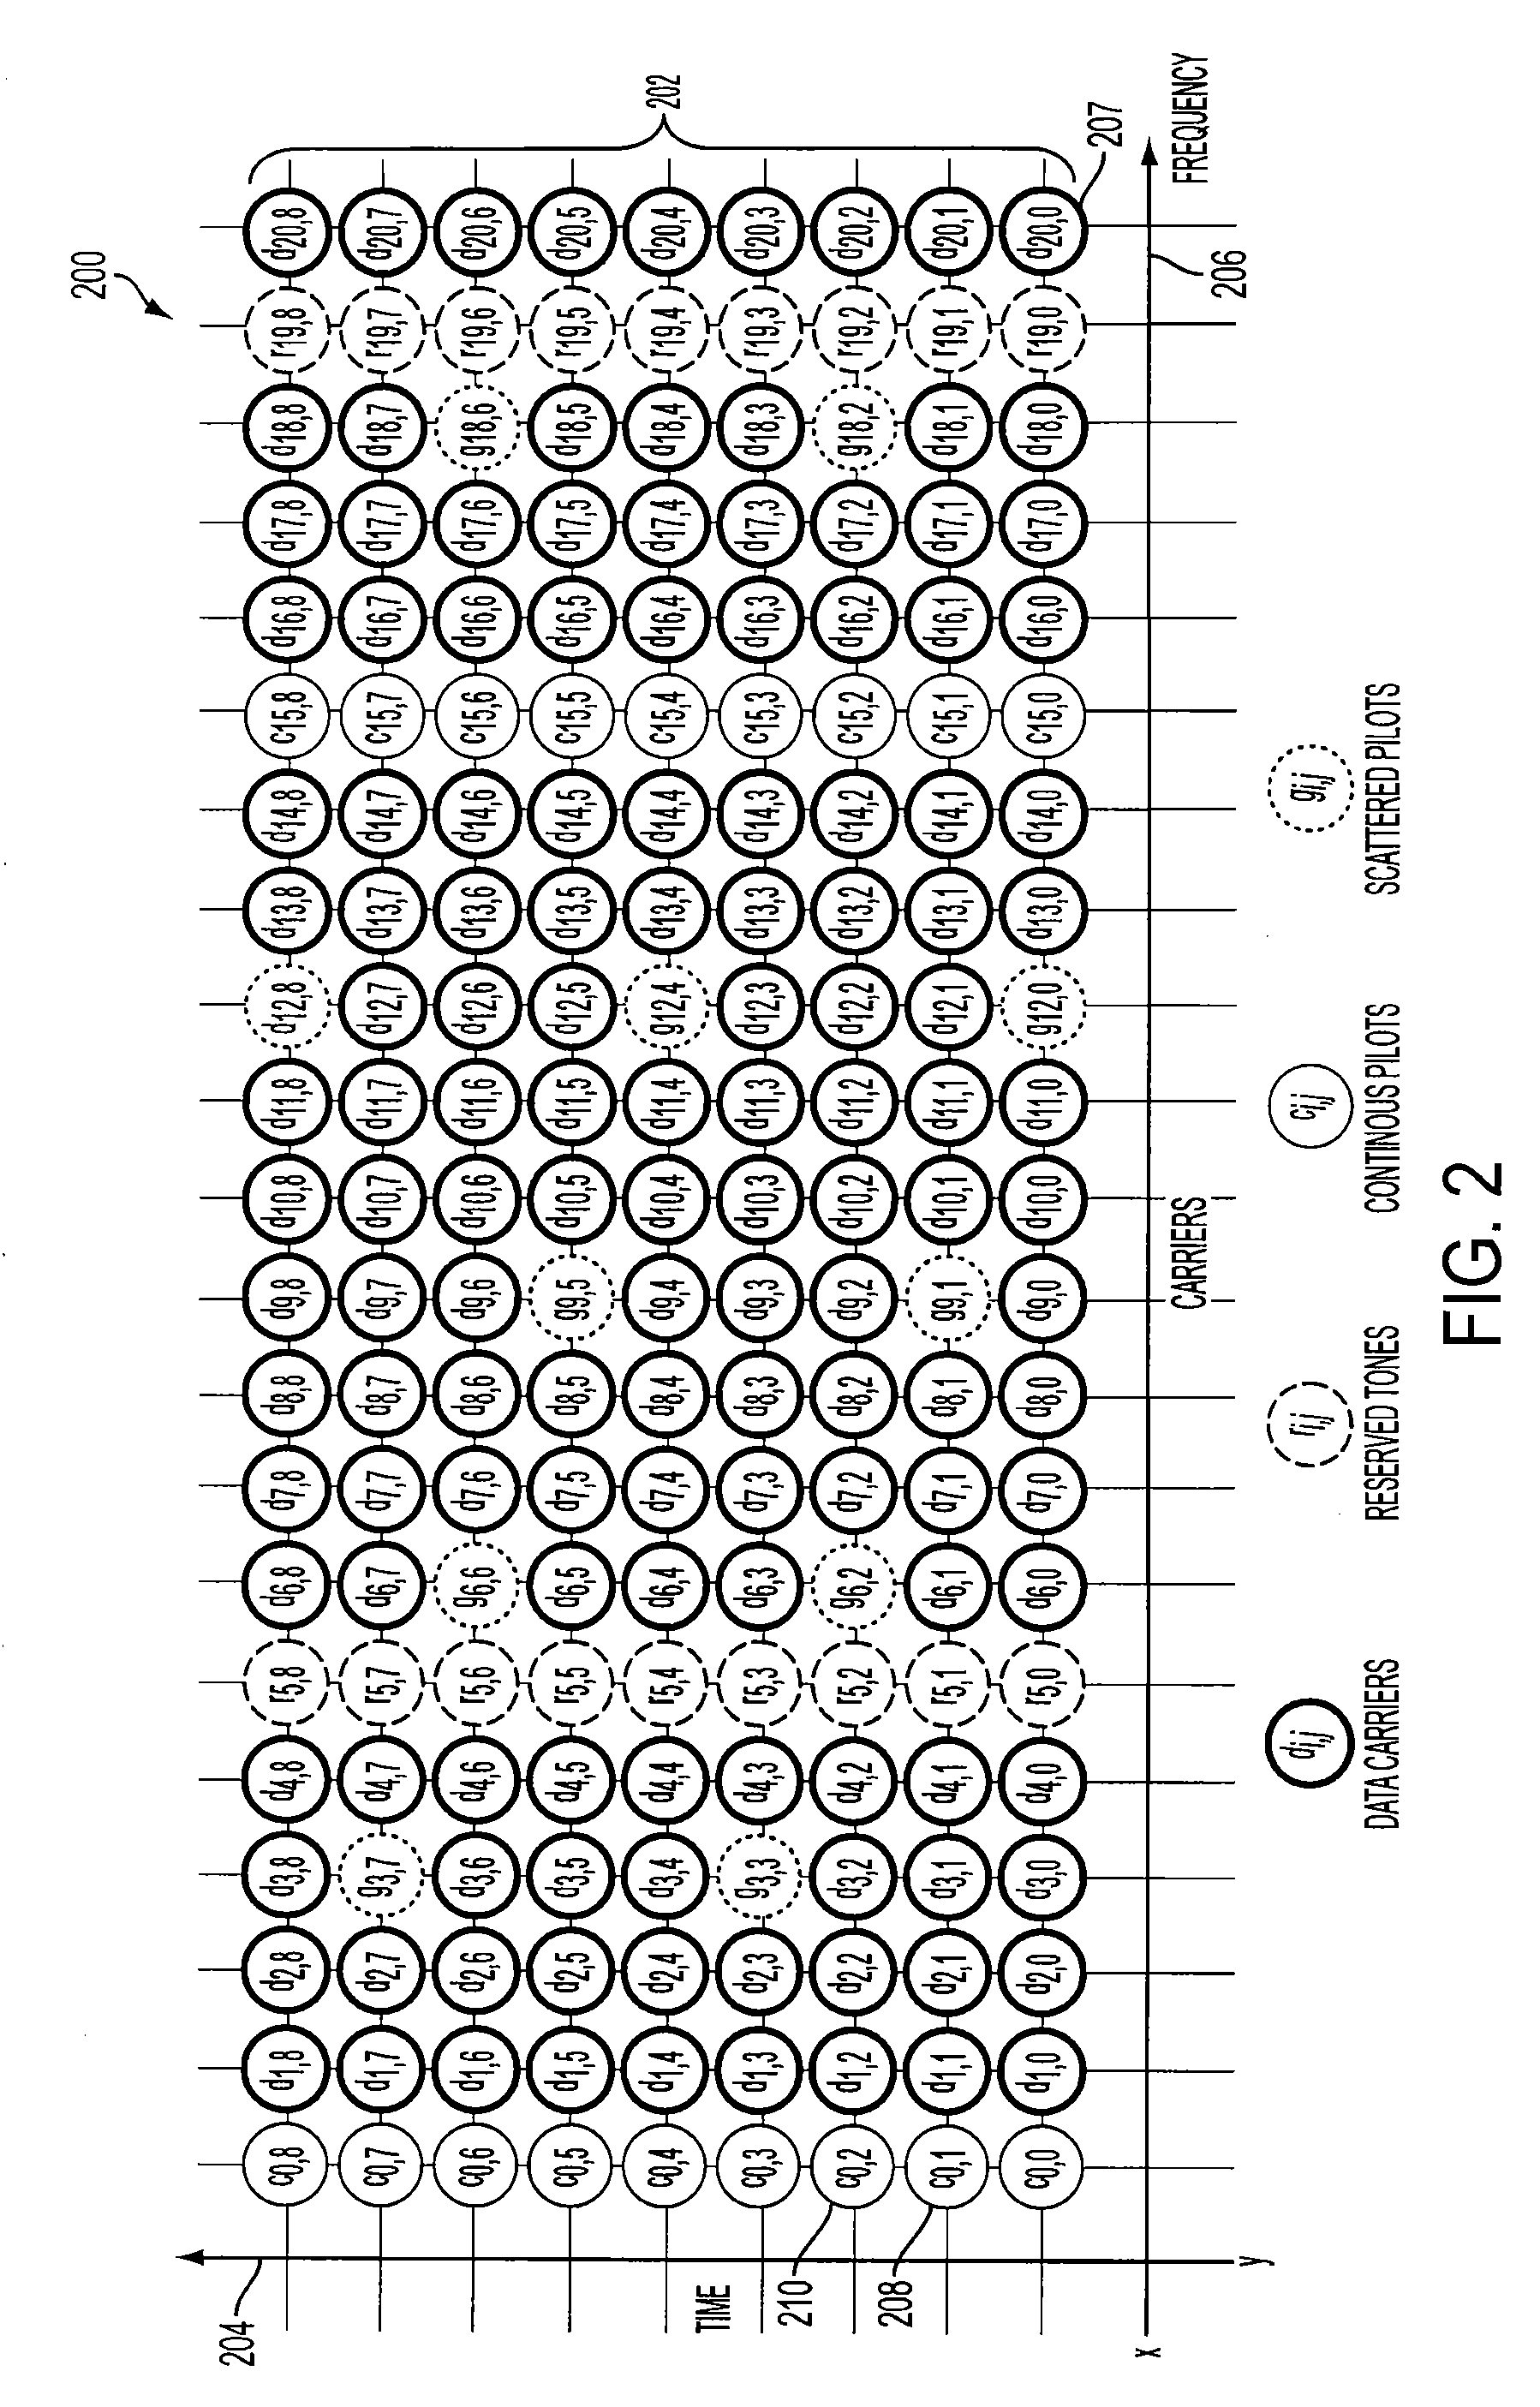 Method to Reduce Peak to Average Power Ratio in Multi-Carrier Modulation Receivers